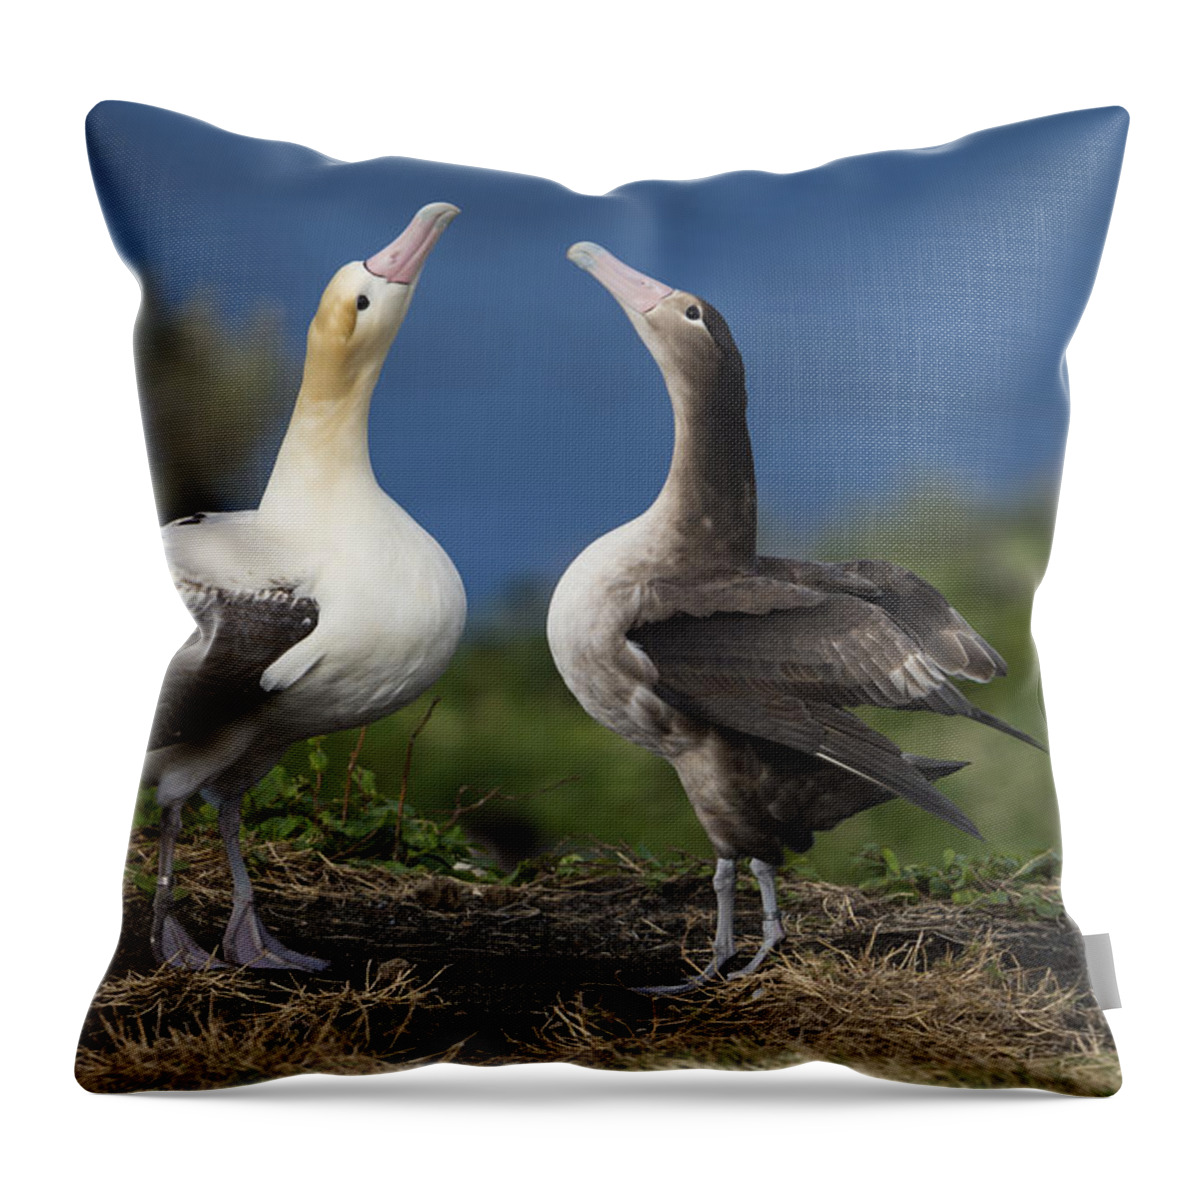 536841 Throw Pillow featuring the photograph Short-tailed Albatross Courting by Tui De Roy